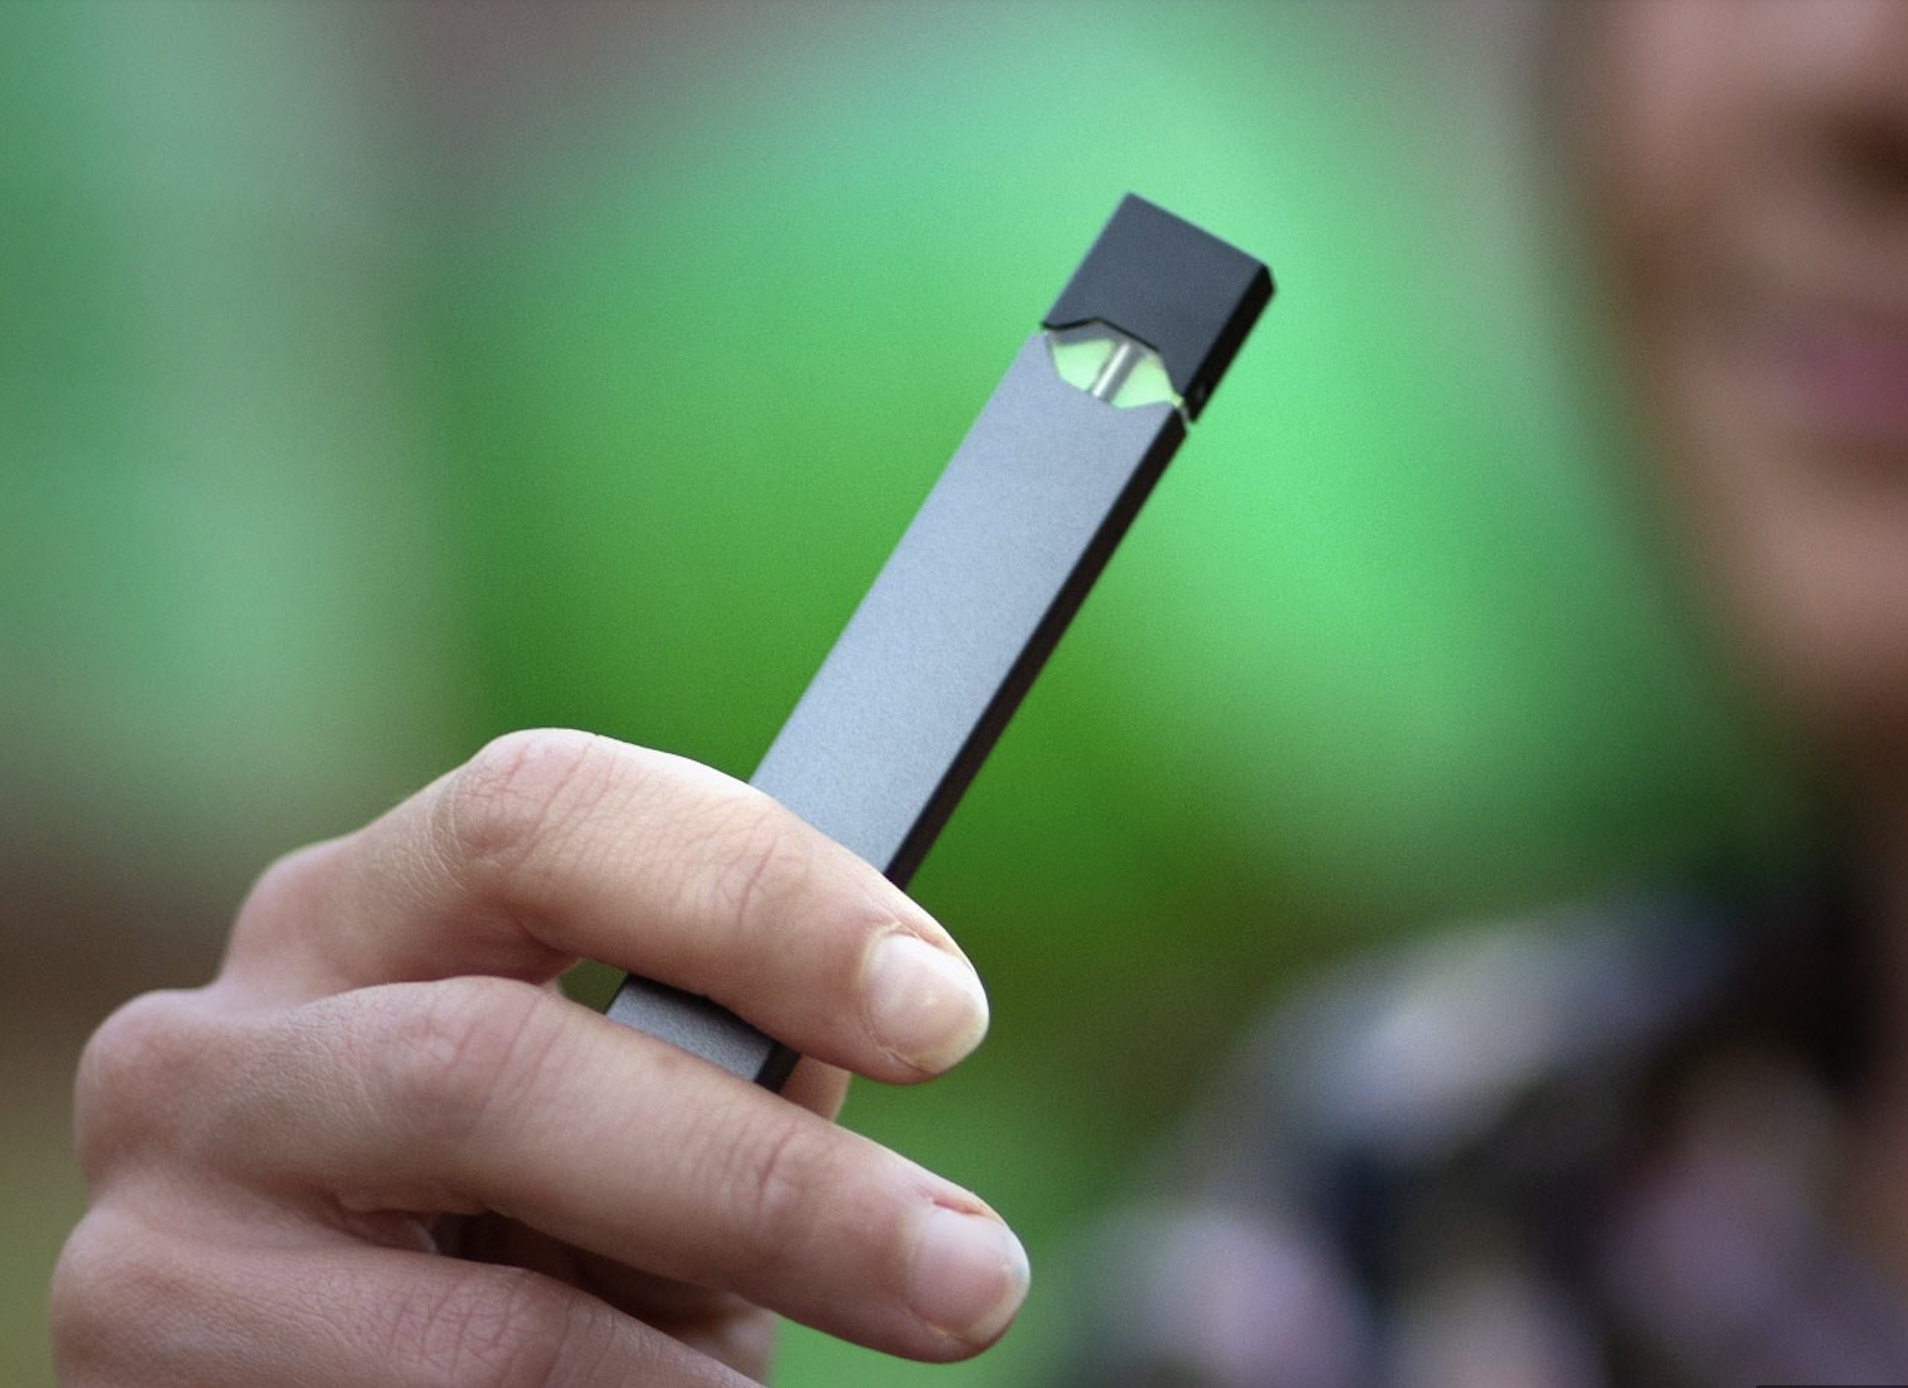 The Most Recent Information Concerning Juul's $440 Million Settlement To U.S. States